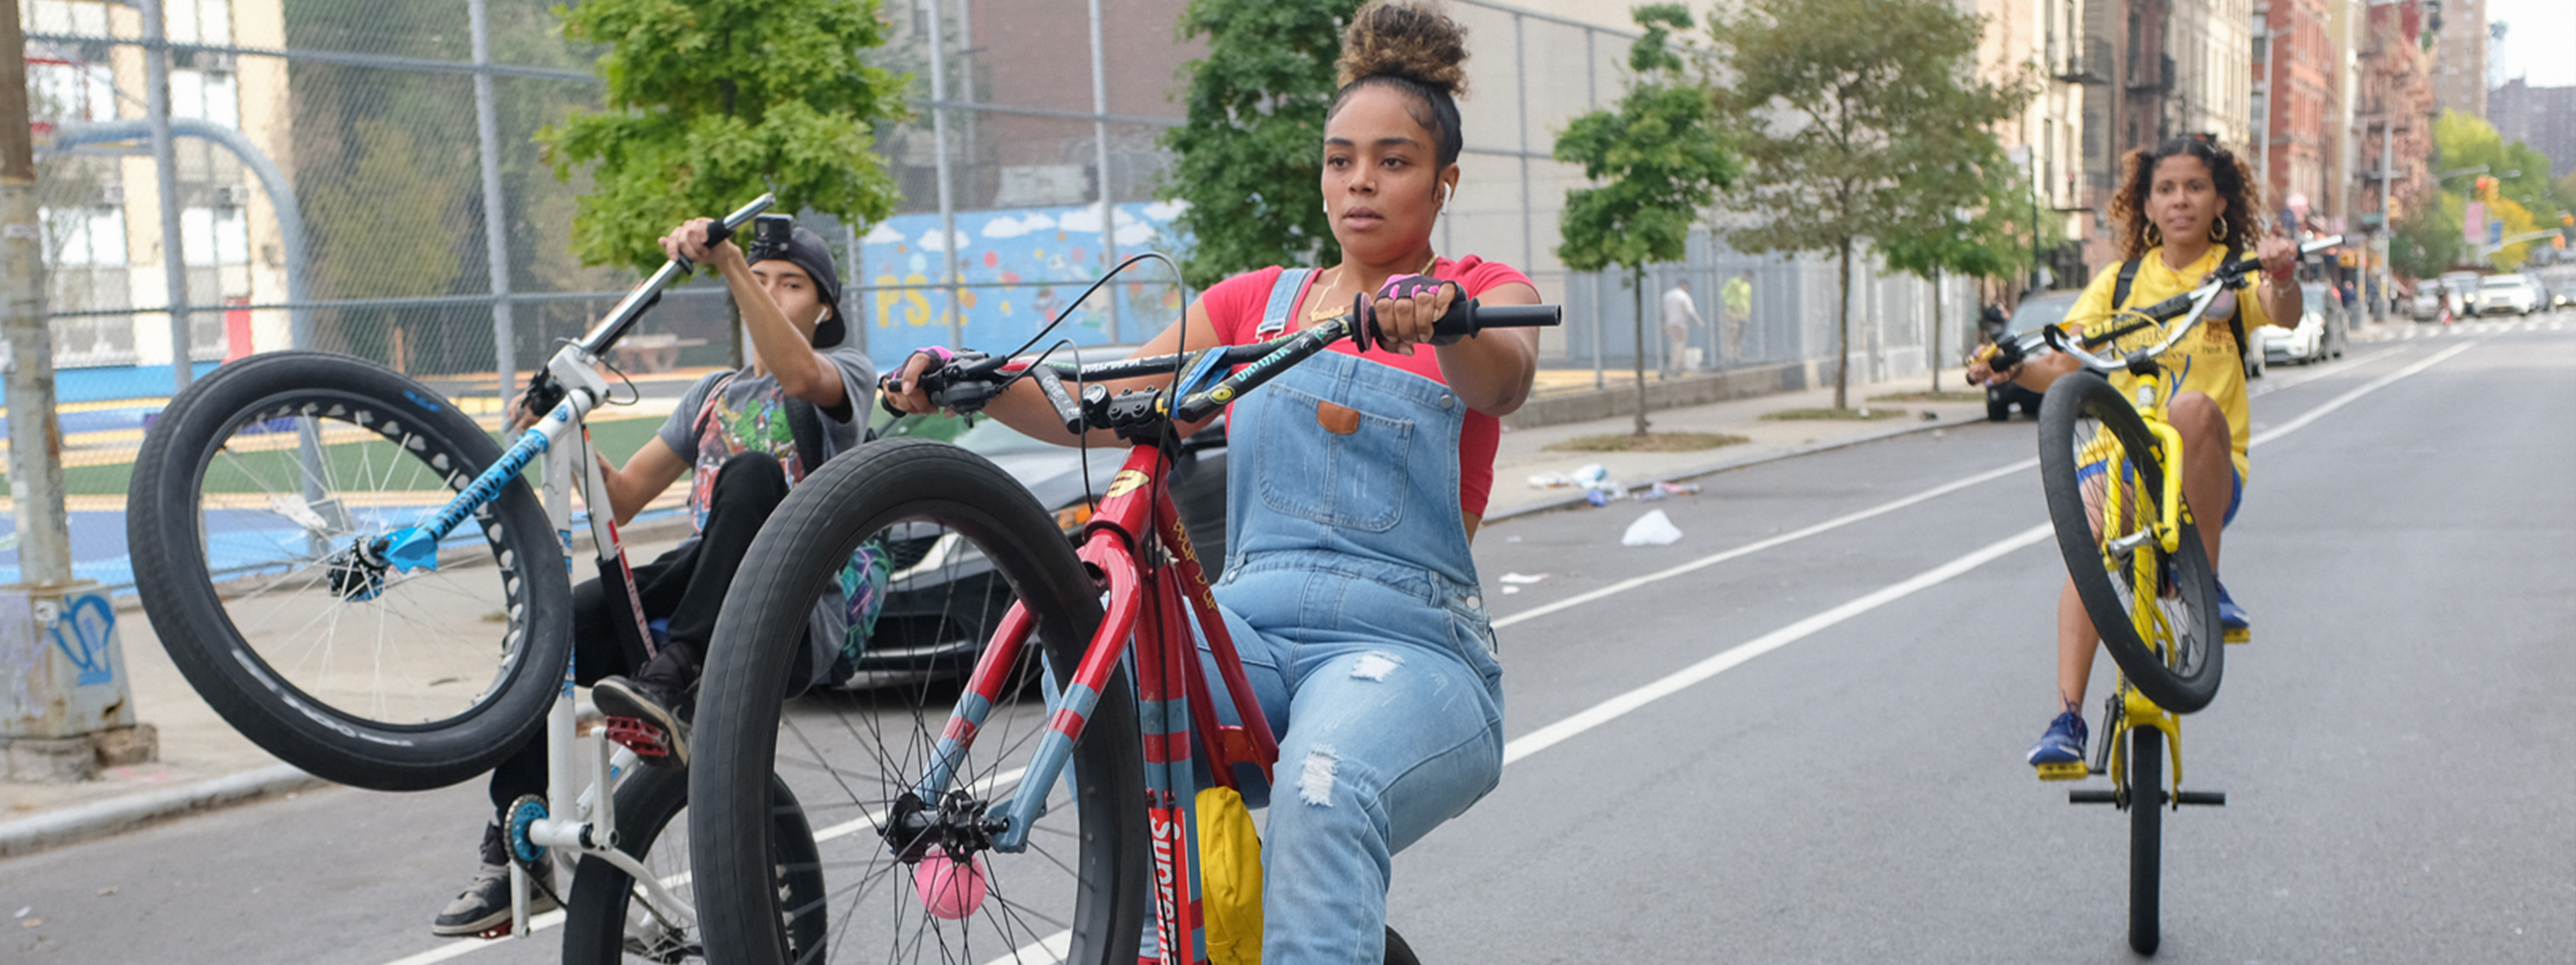 Program 1 URBAN BIKE + CINEMATIC shorts Tickets Online Streaming , Available to stream through April 30, 2023 Bold Type Tickets